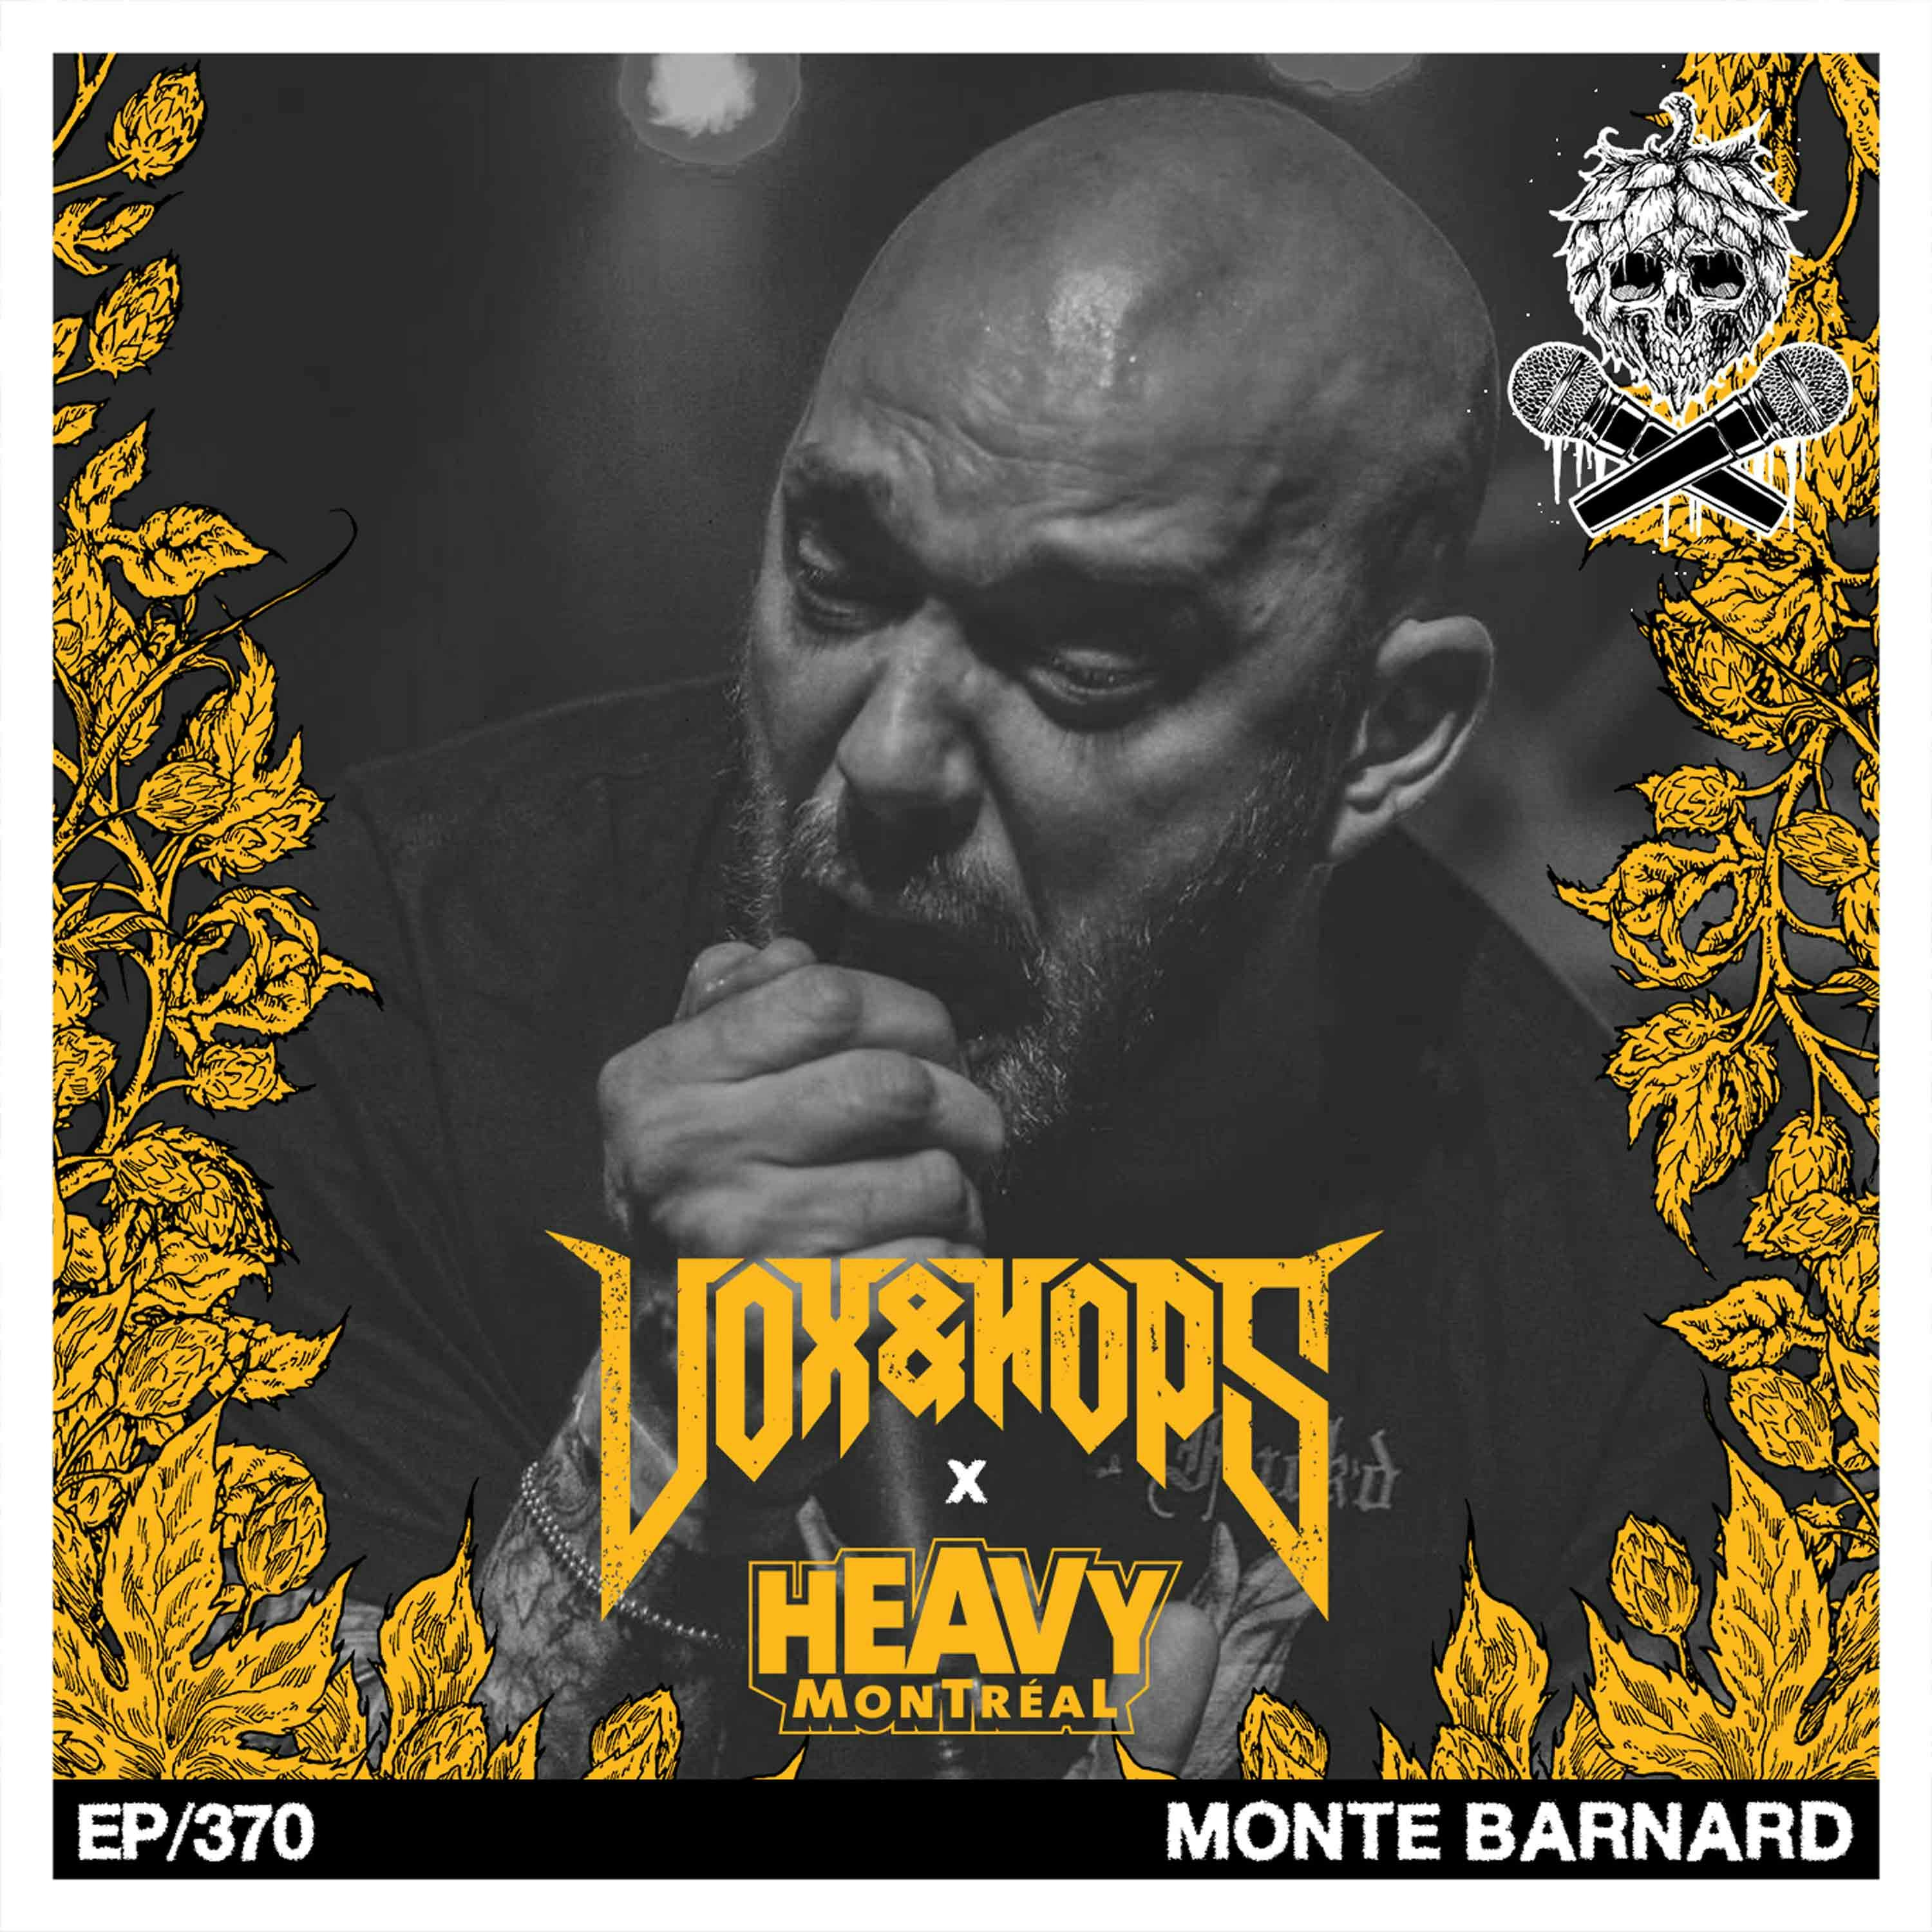 Back on Stage with Monte Barnard of Emberthrone / Lesser Animal